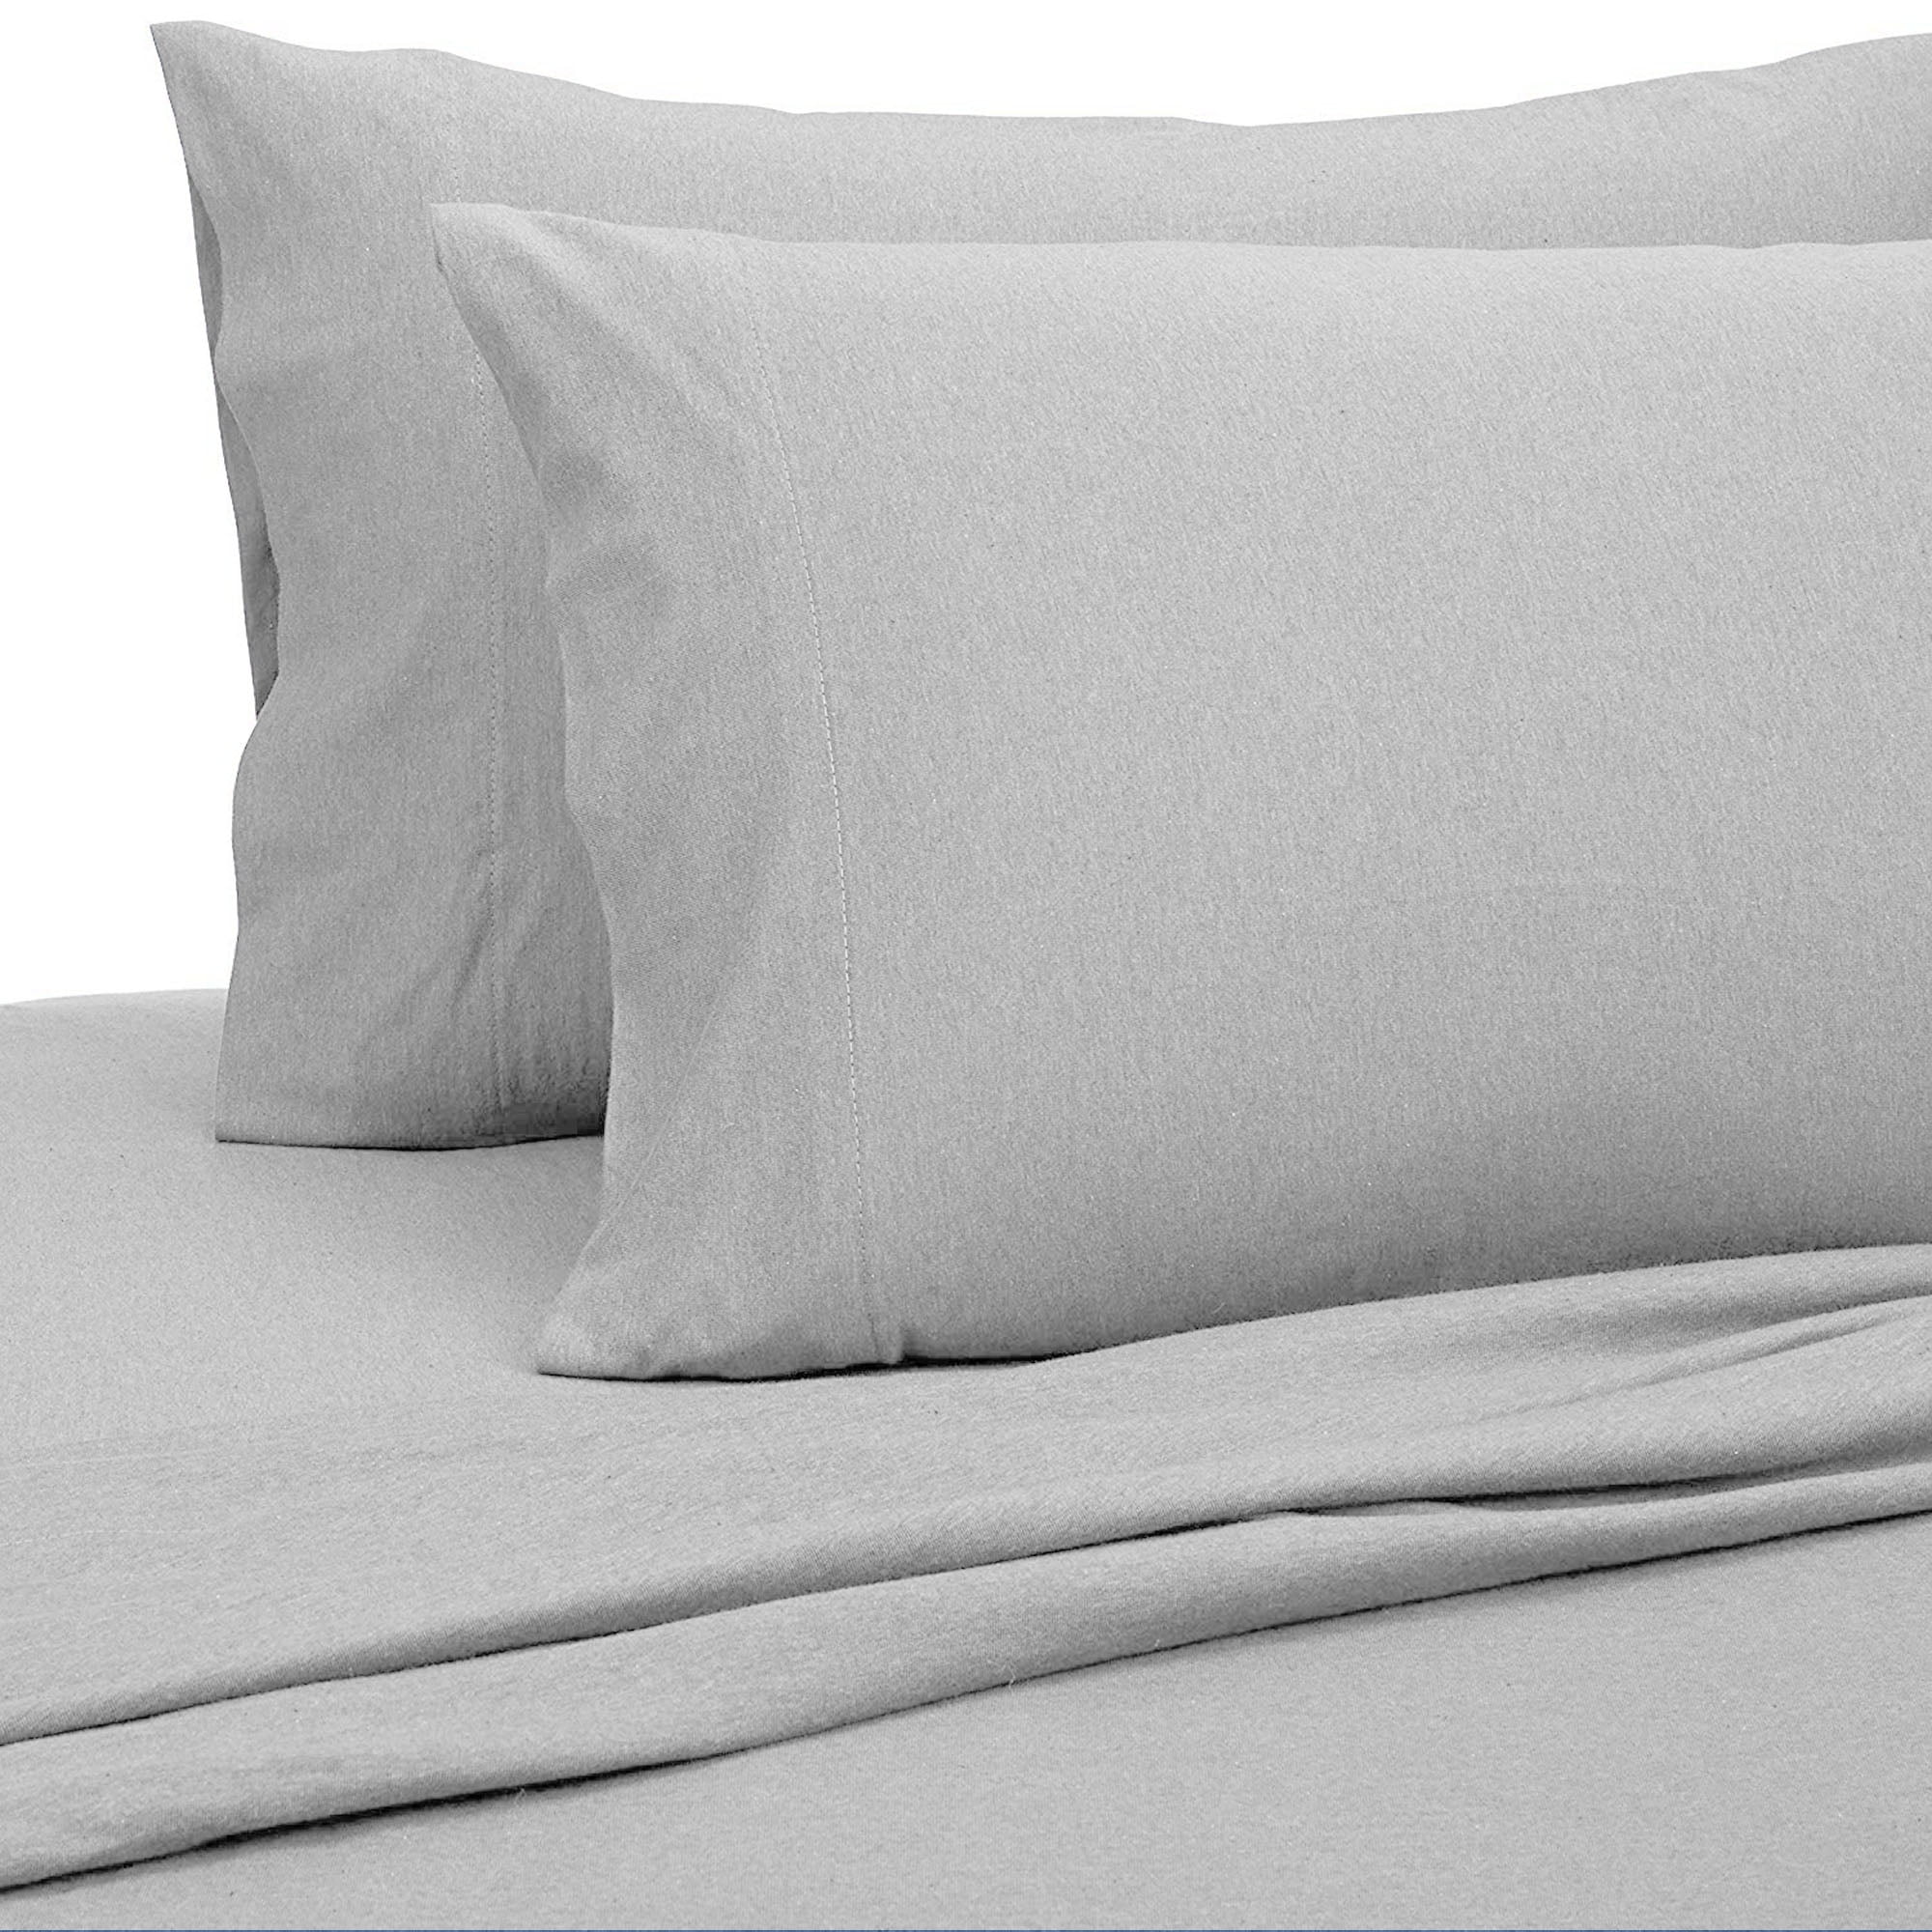 LINEN GALAXY /® T200 EGYPTIAN COTTON WHITE FITTED SHEET DOUBLE WITH PAIR OF PILLOW CASES